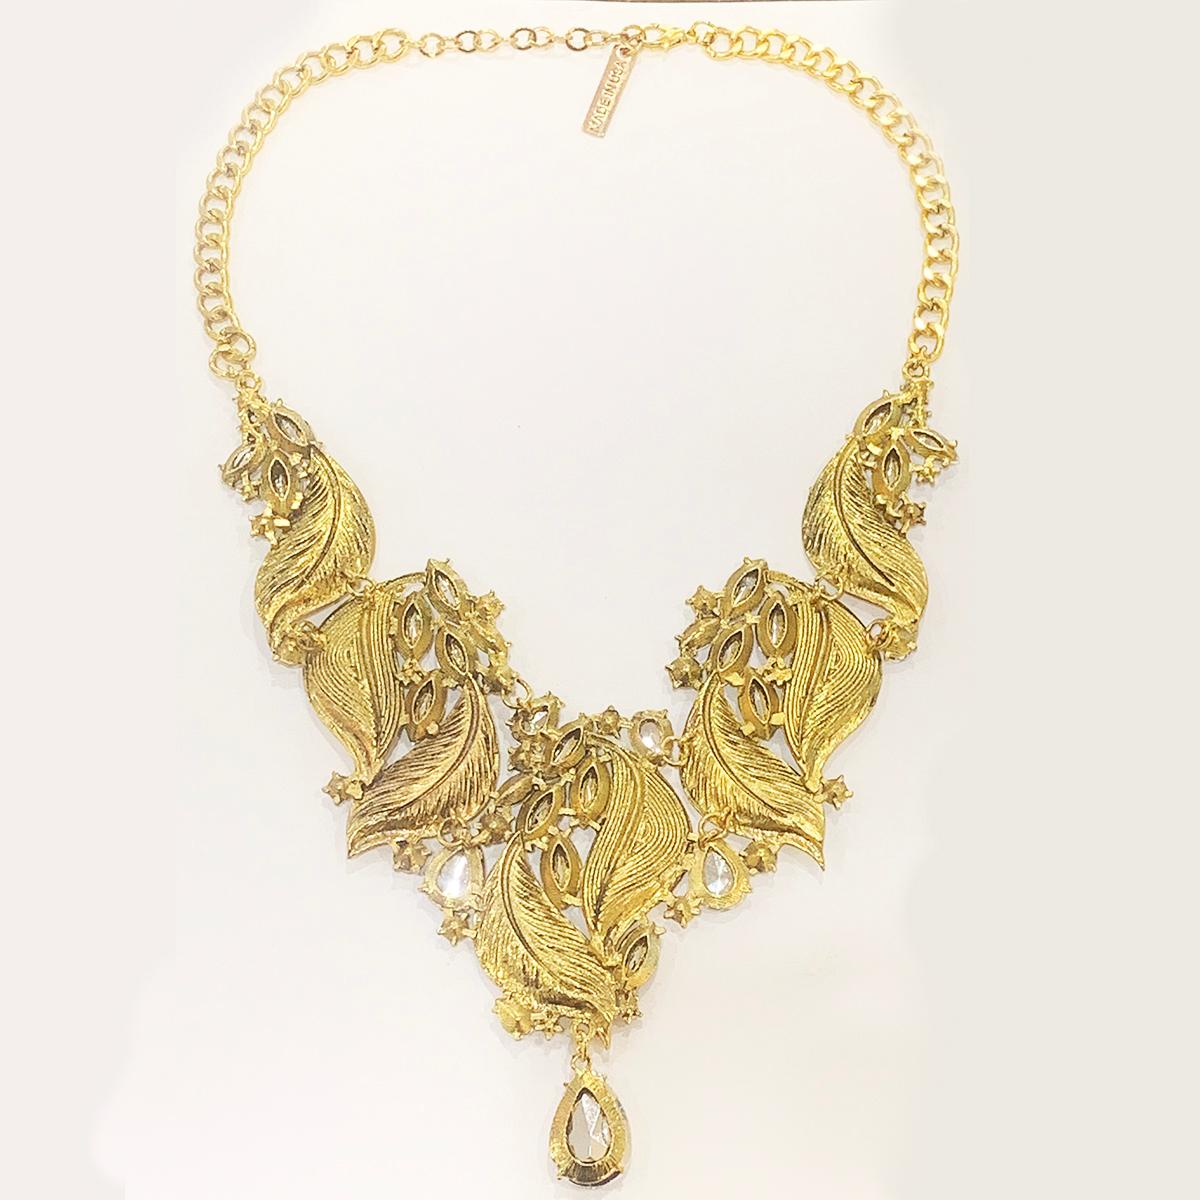 Oscar De La Renta Necklace with gilt leaves and white mirror diamantes In New Condition For Sale In Daylesford, Victoria